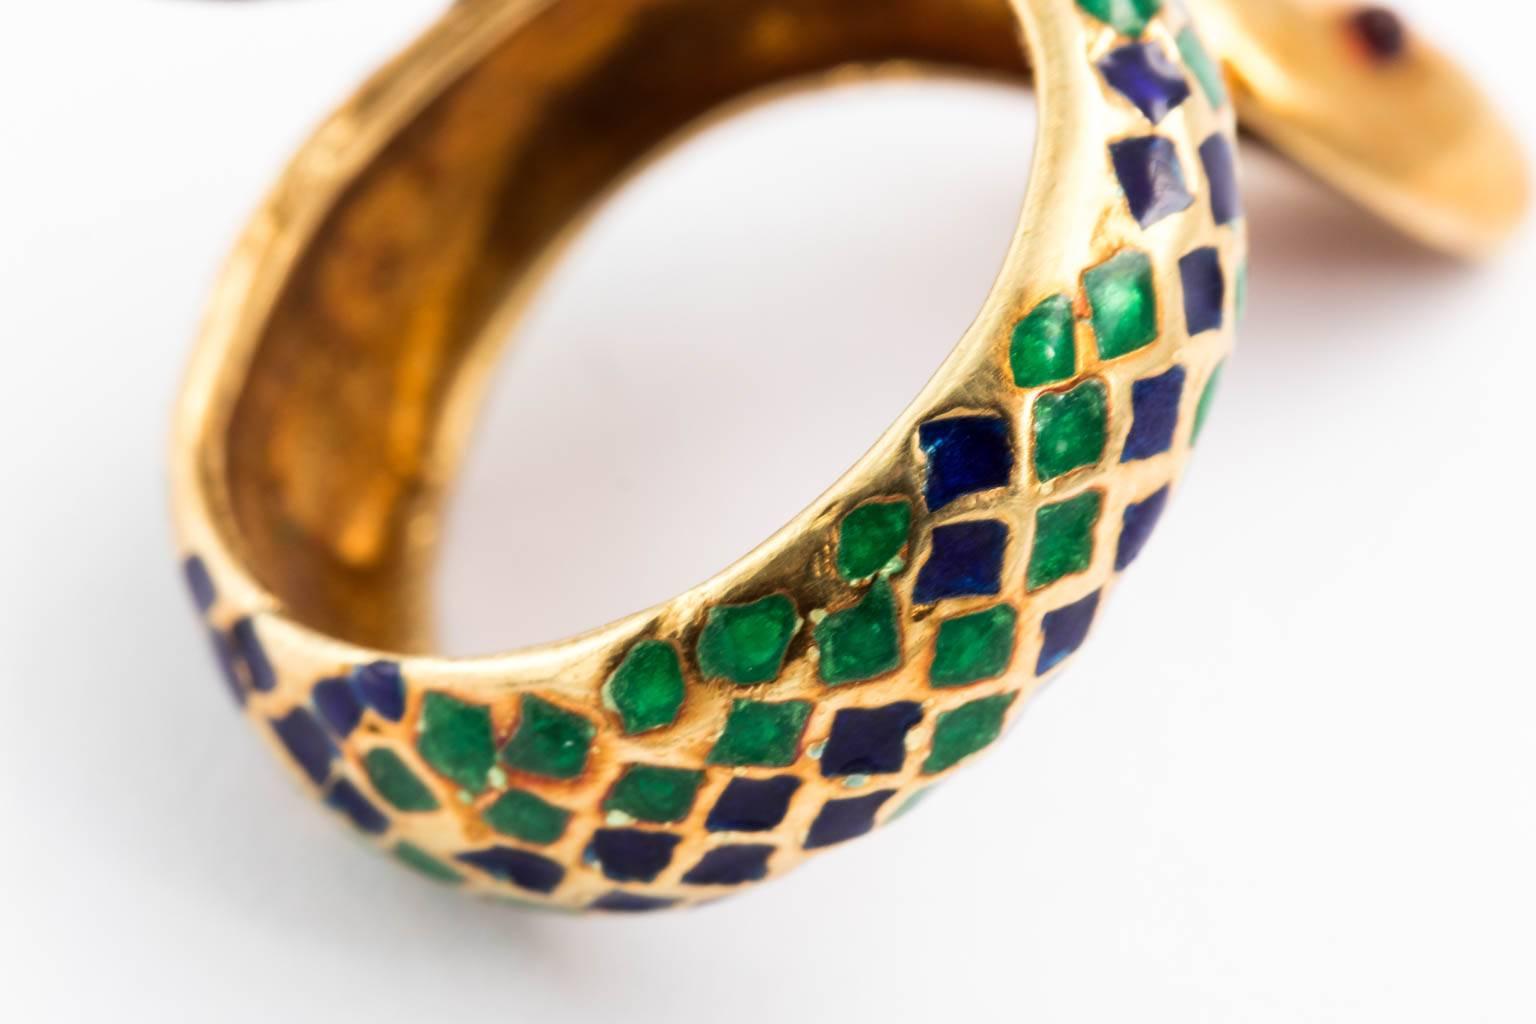 Circa mid 20th century 18 karat solid gold and enamel serpent ring. Scales in green and dark blue with cabochon ruby eyes. Its head and tail are attached so it will not bend.
